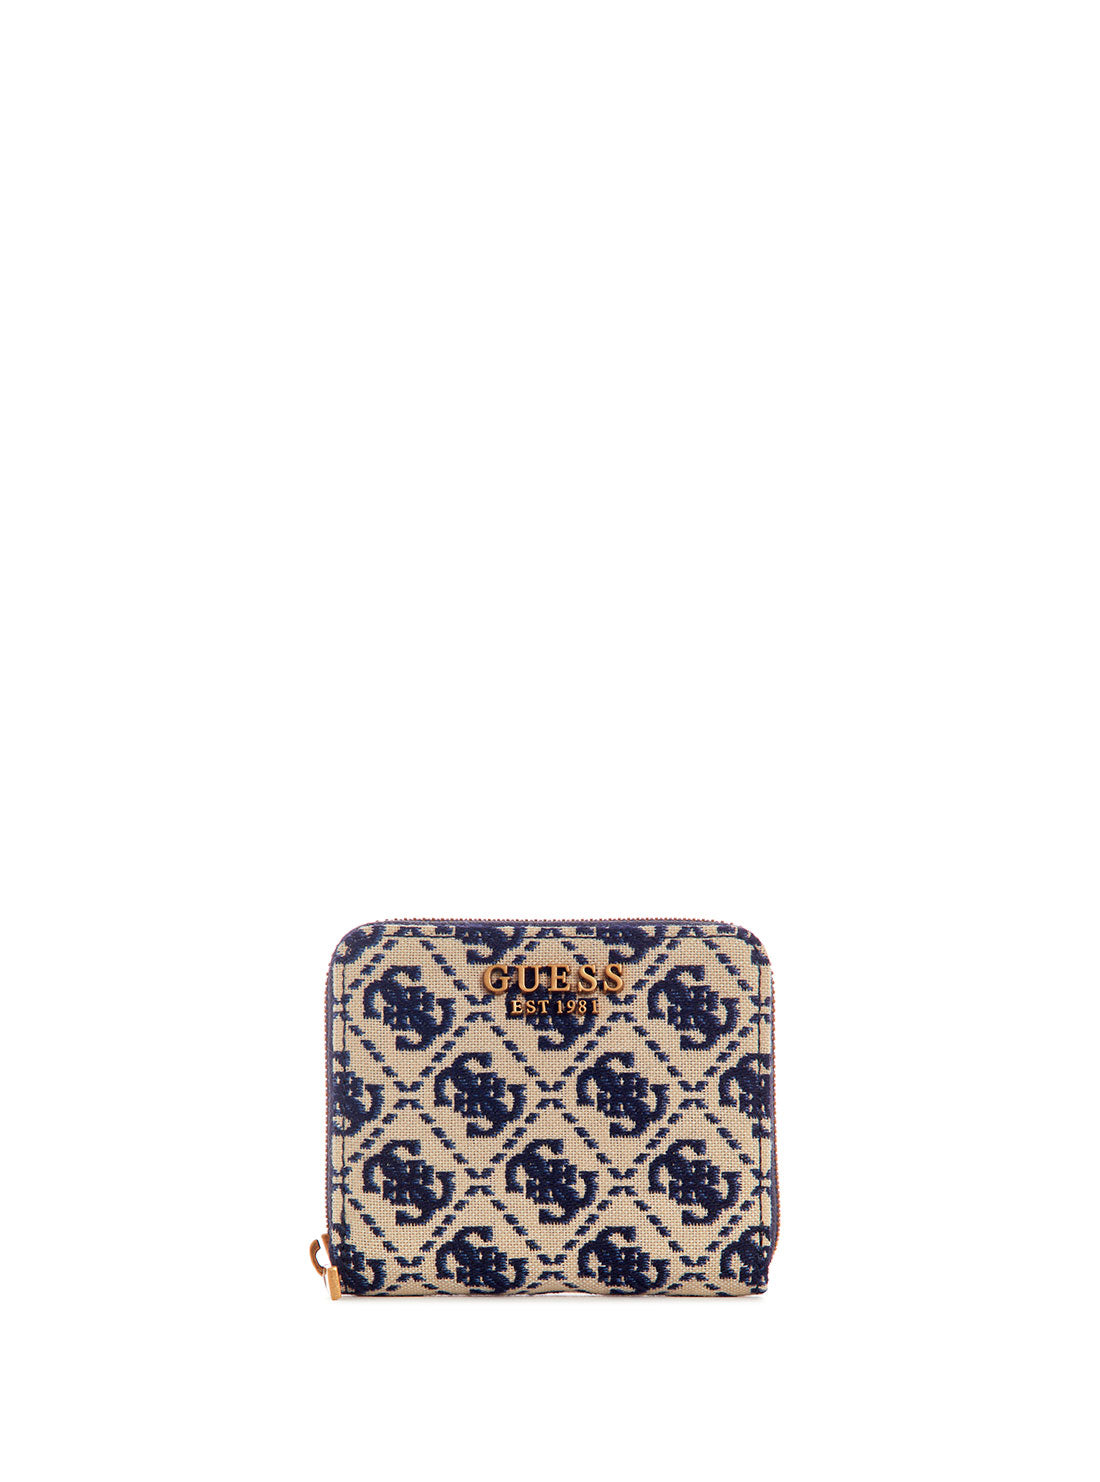 GUESS Women's Navy Logo Izzy Small Wallet JB865437 Front View